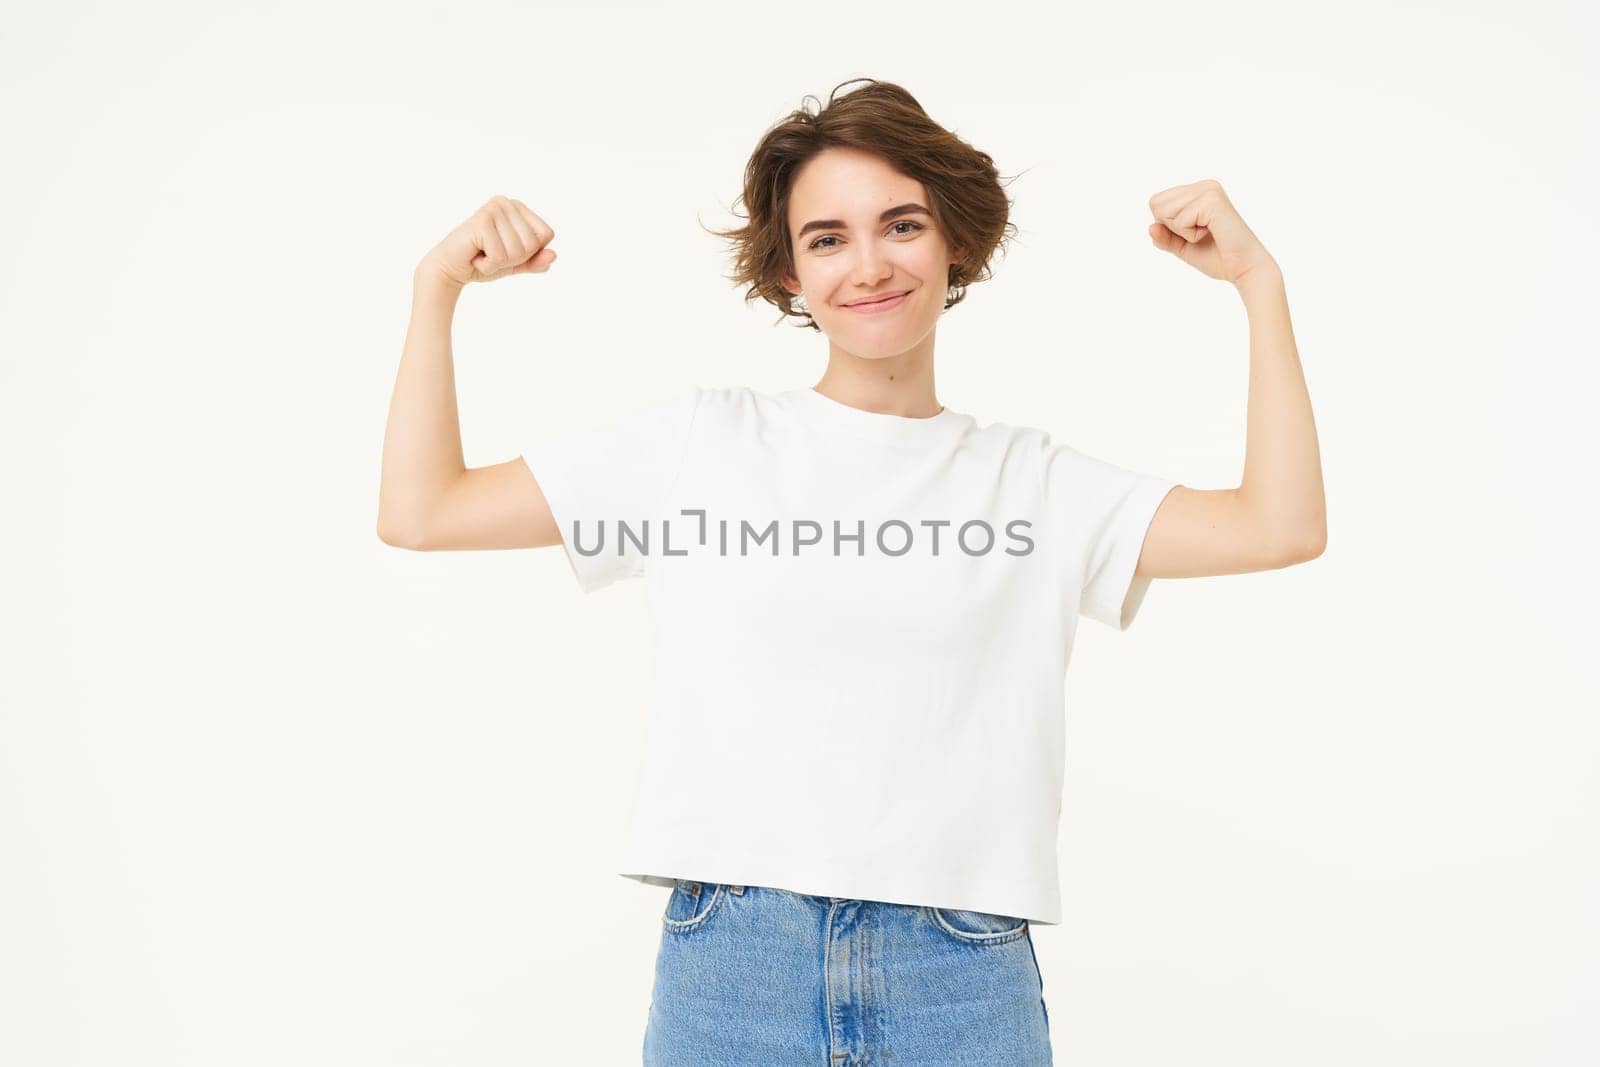 Portrait of confident and strong young woman, flexing biceps, shows her muscles on arms with proud smiling face, posing over white background.